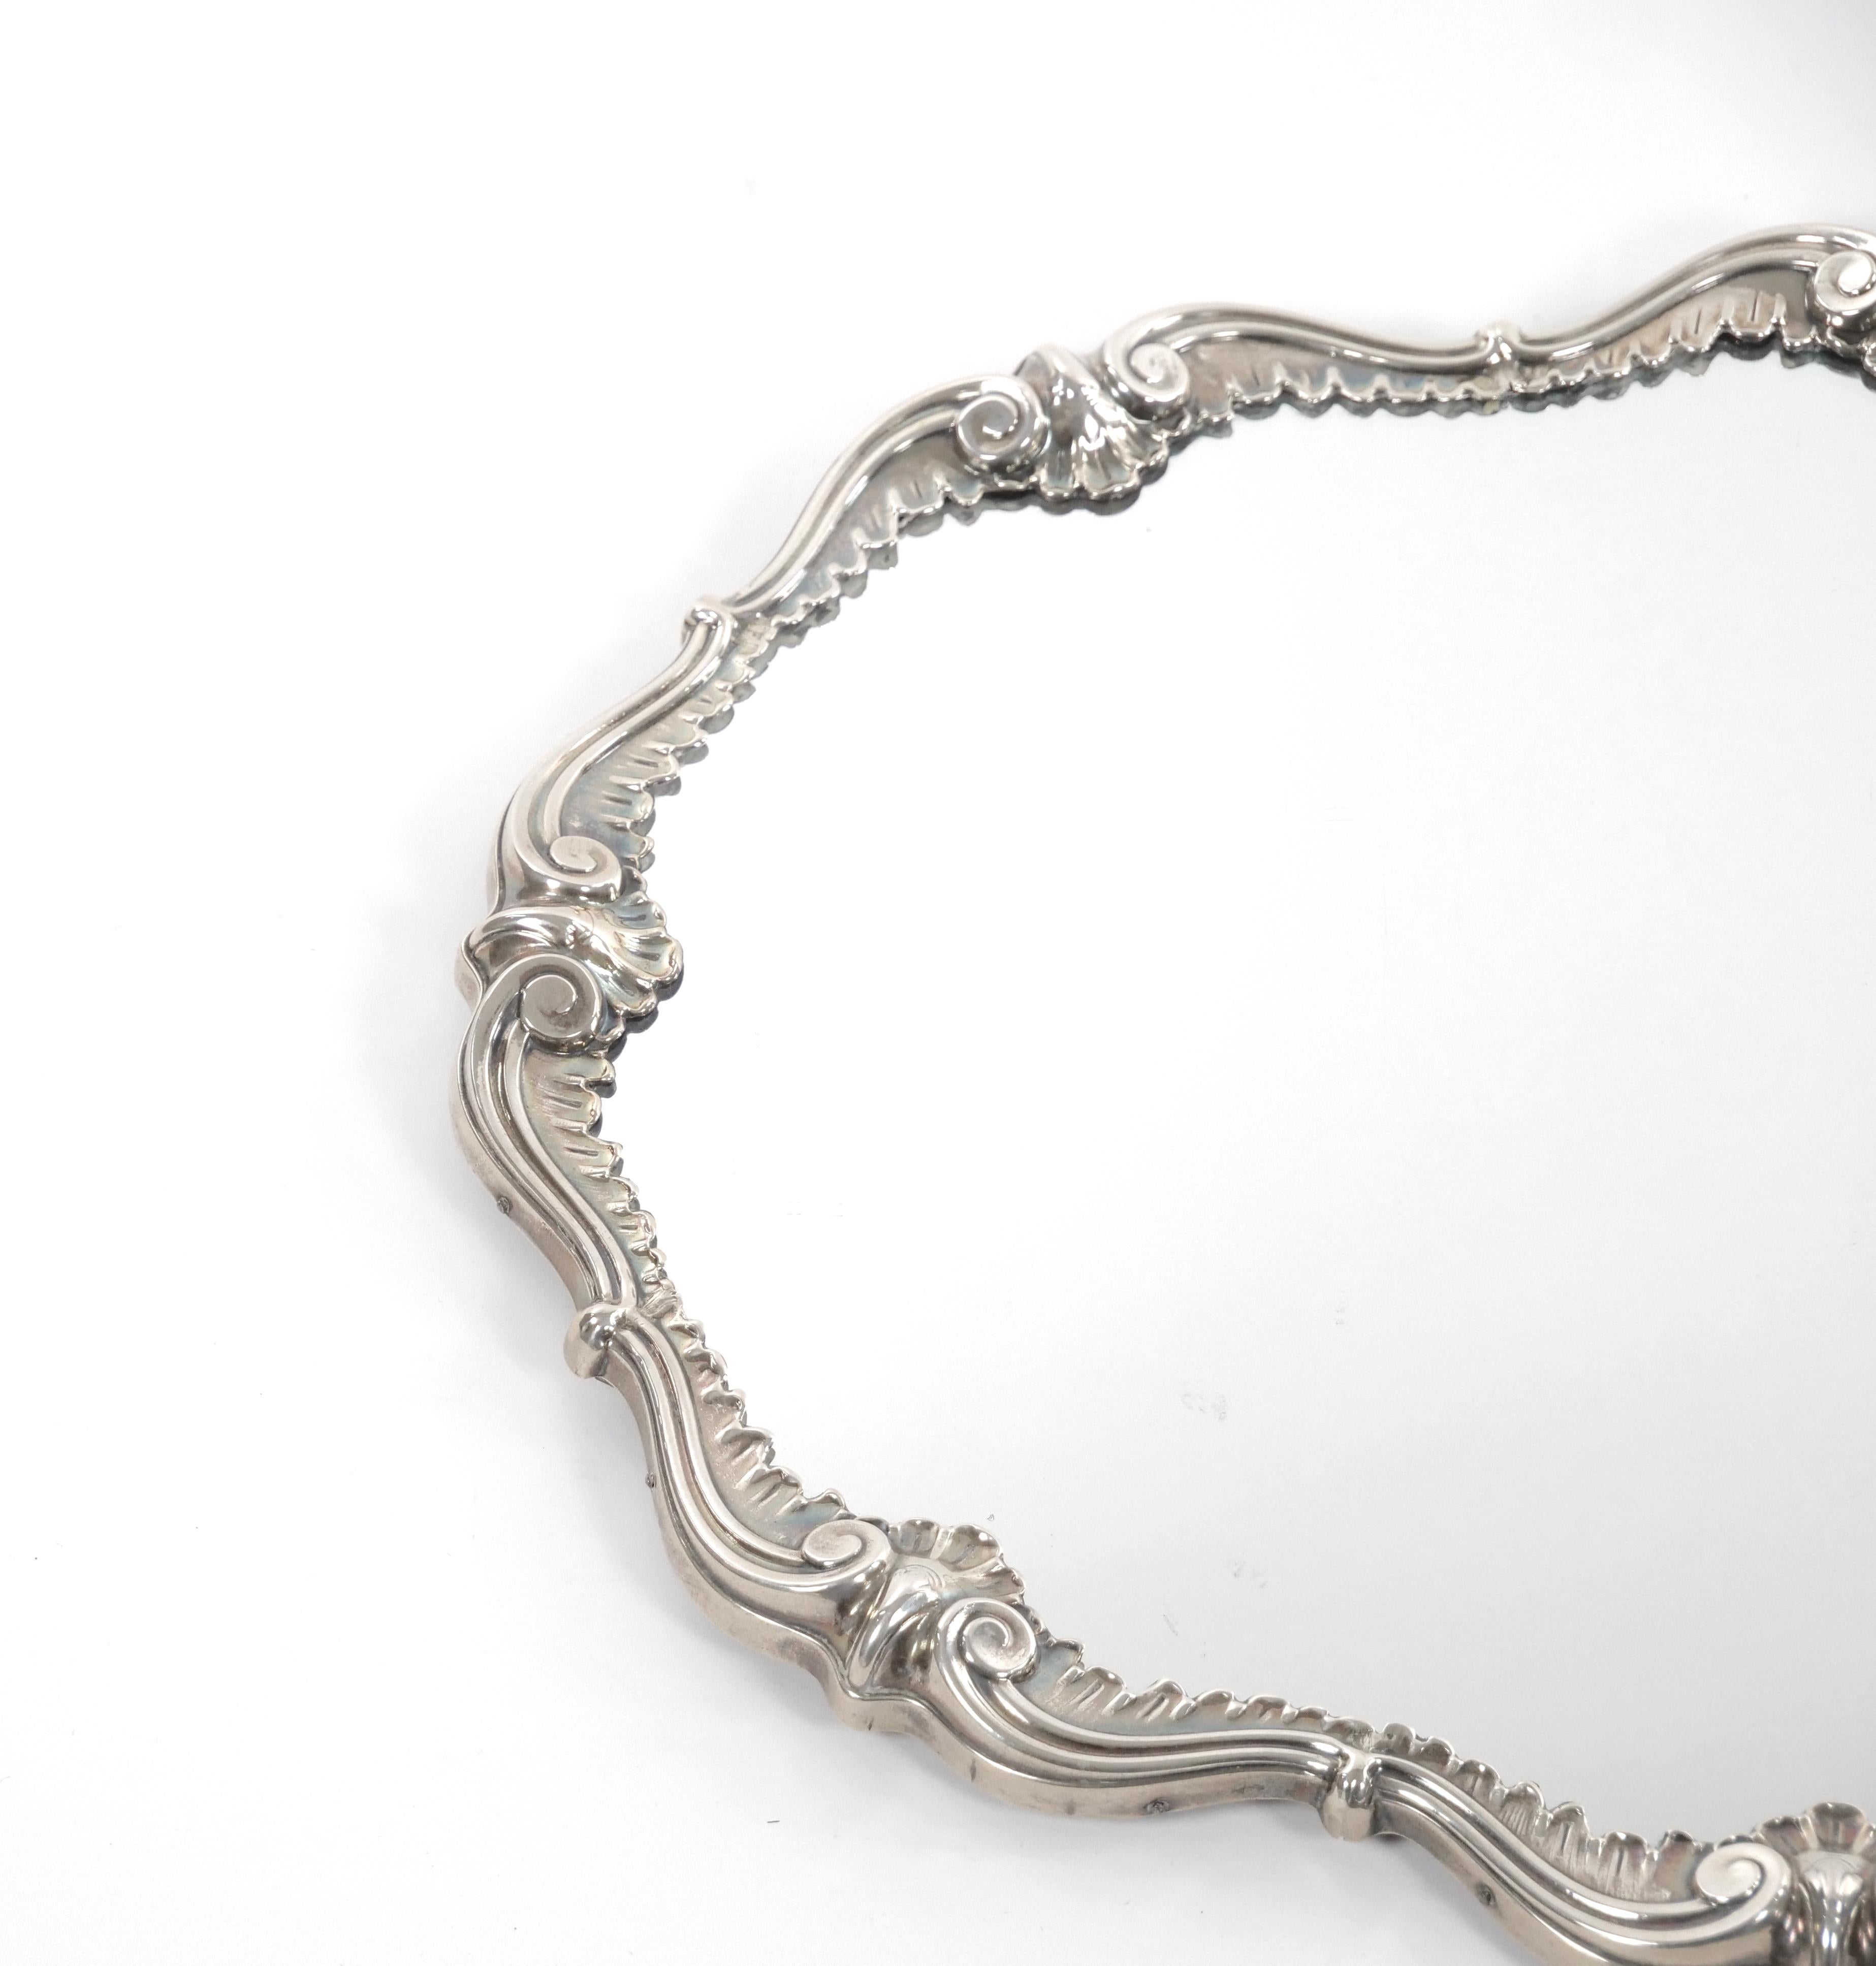 
Experience the epitome of Italian craftsmanship and sophistication with our exquisite Italian silver plate mirrored plateau. This captivating piece combines a striking scrolling shape with meticulously engraved border decorations, resulting in a